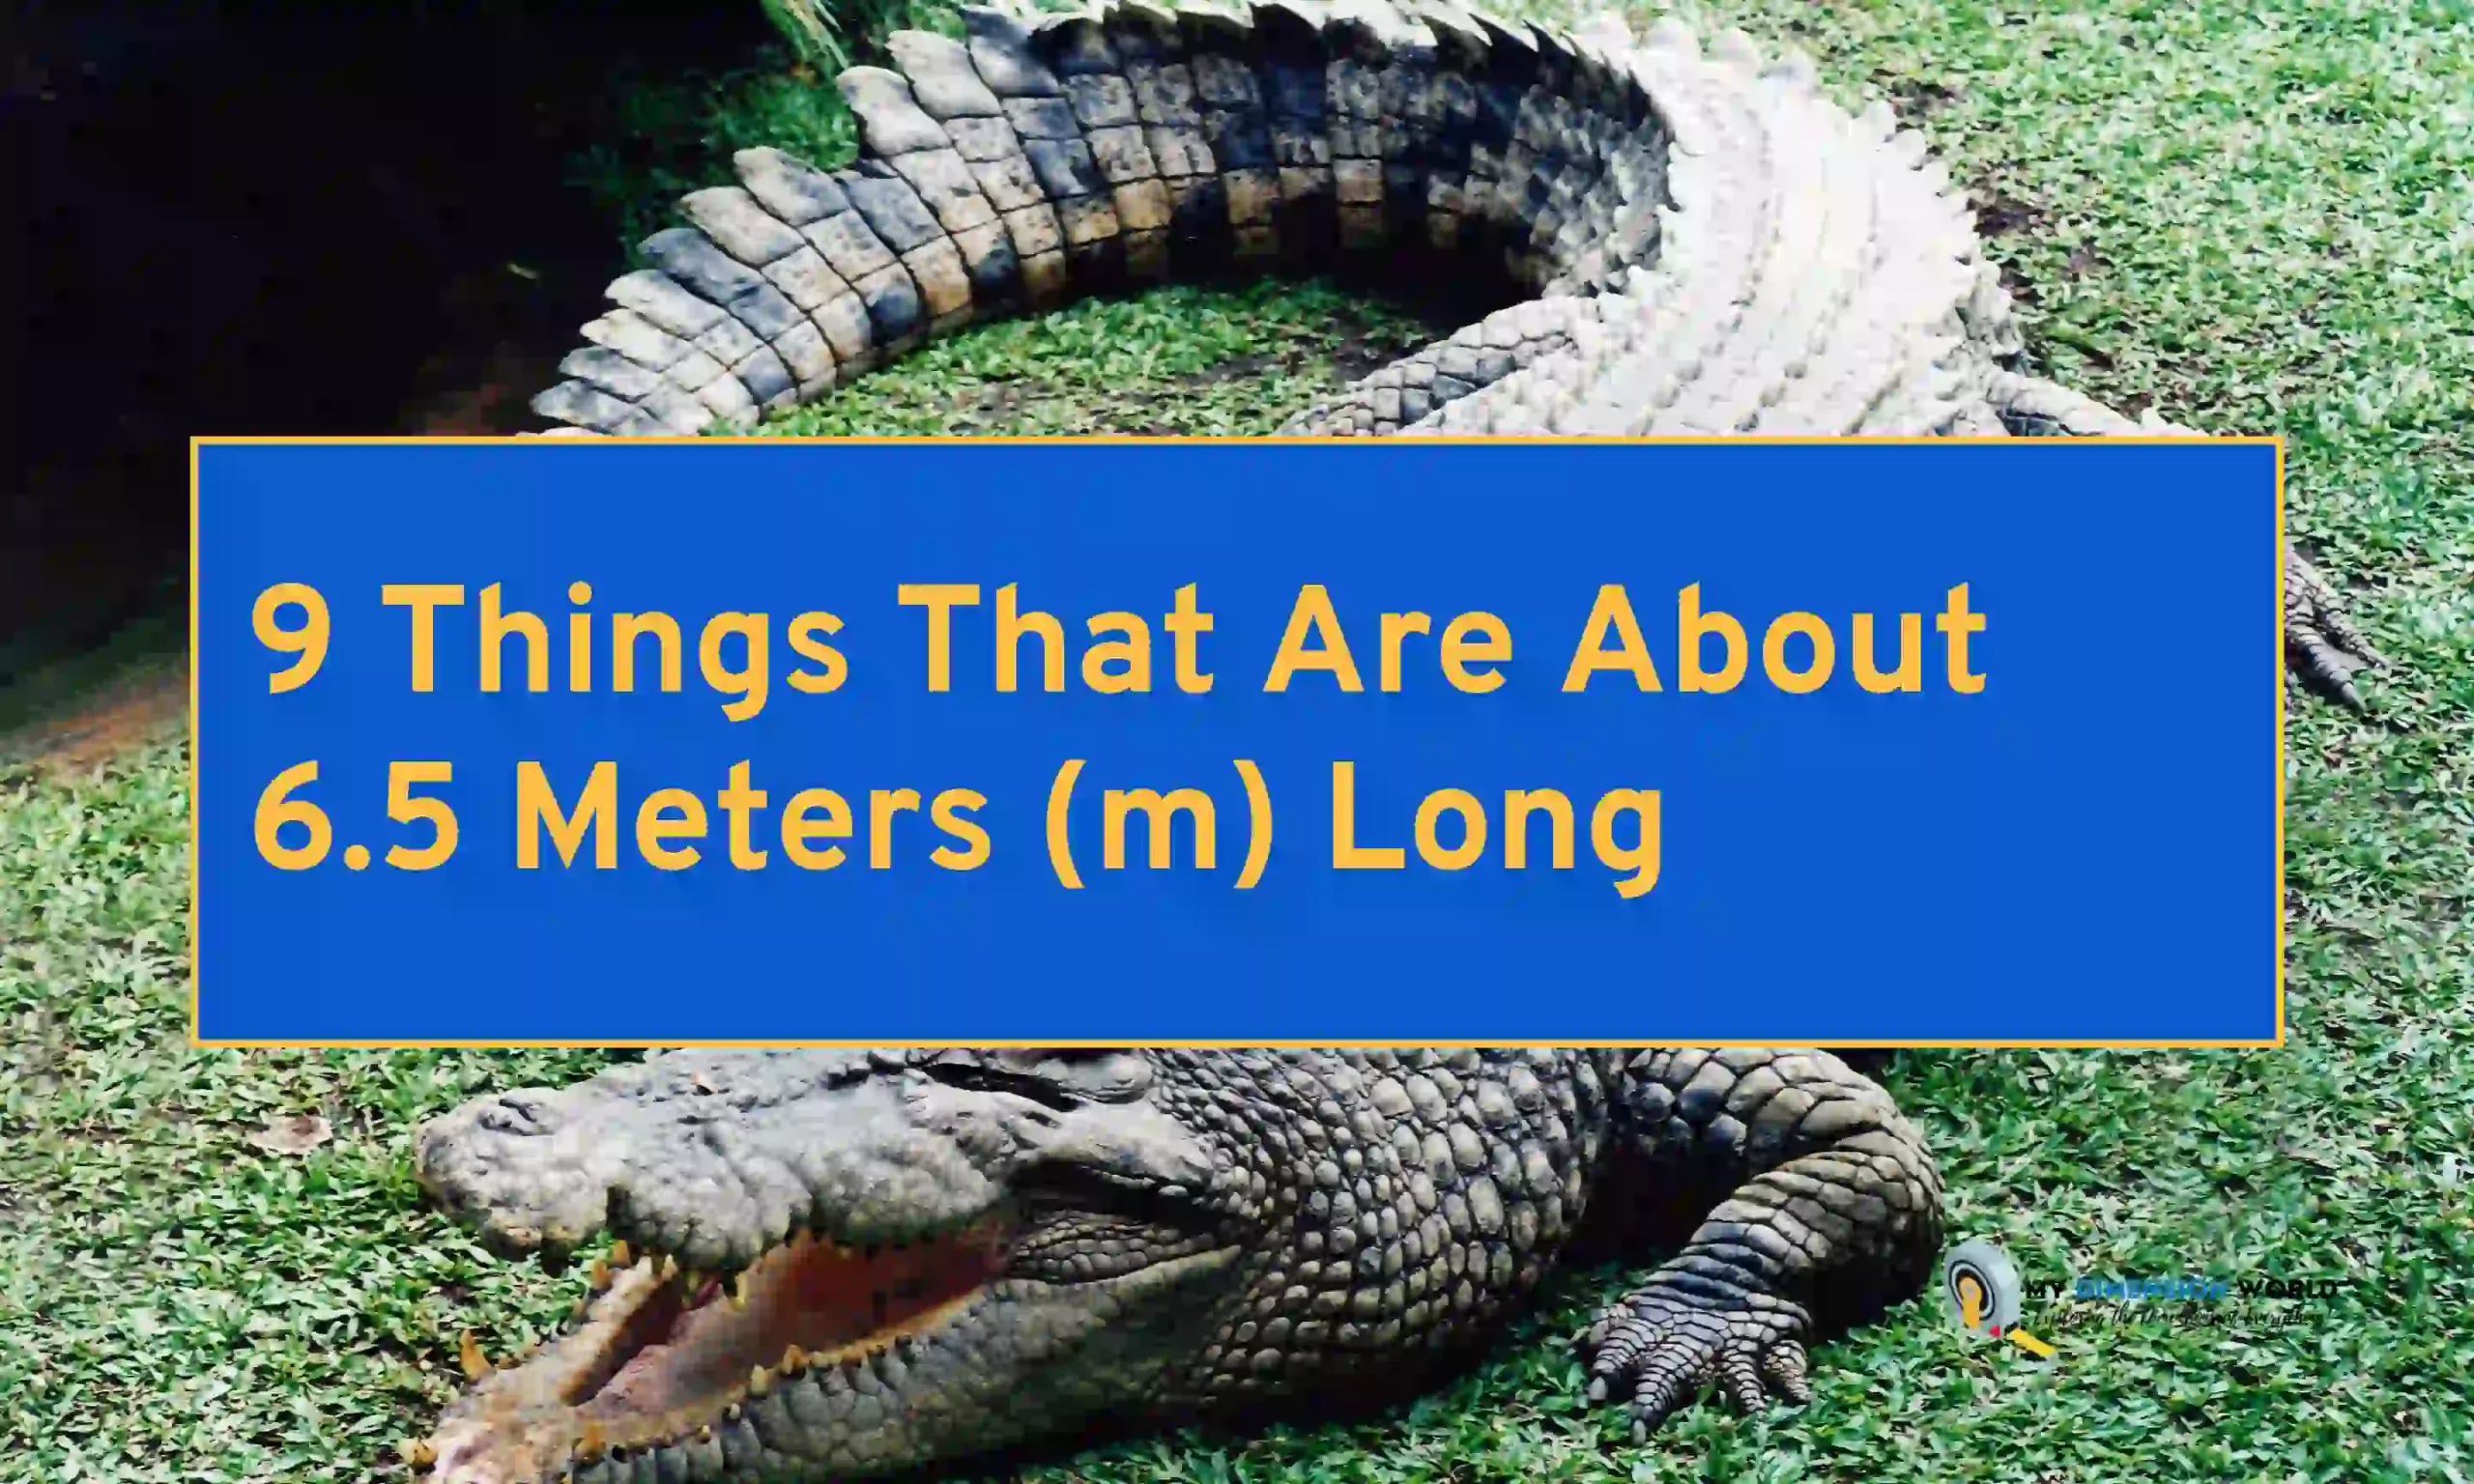 9 Things That Are About 6.5 Meters (m) Long